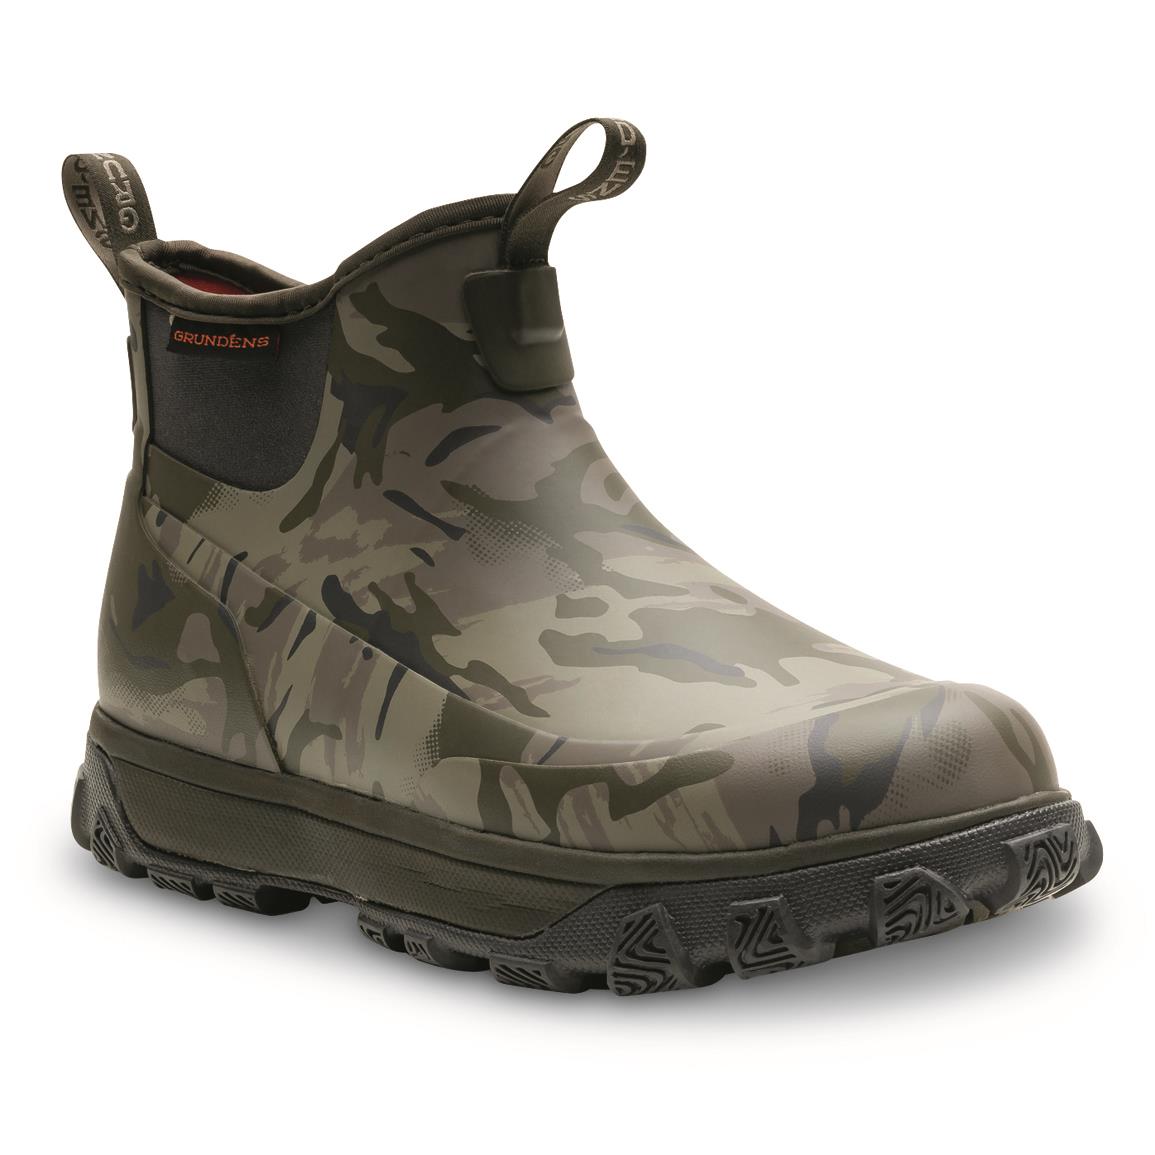 Grundens Men's Deviation Waterproof Ankle Boots, Camo, Refraction Camo Stone